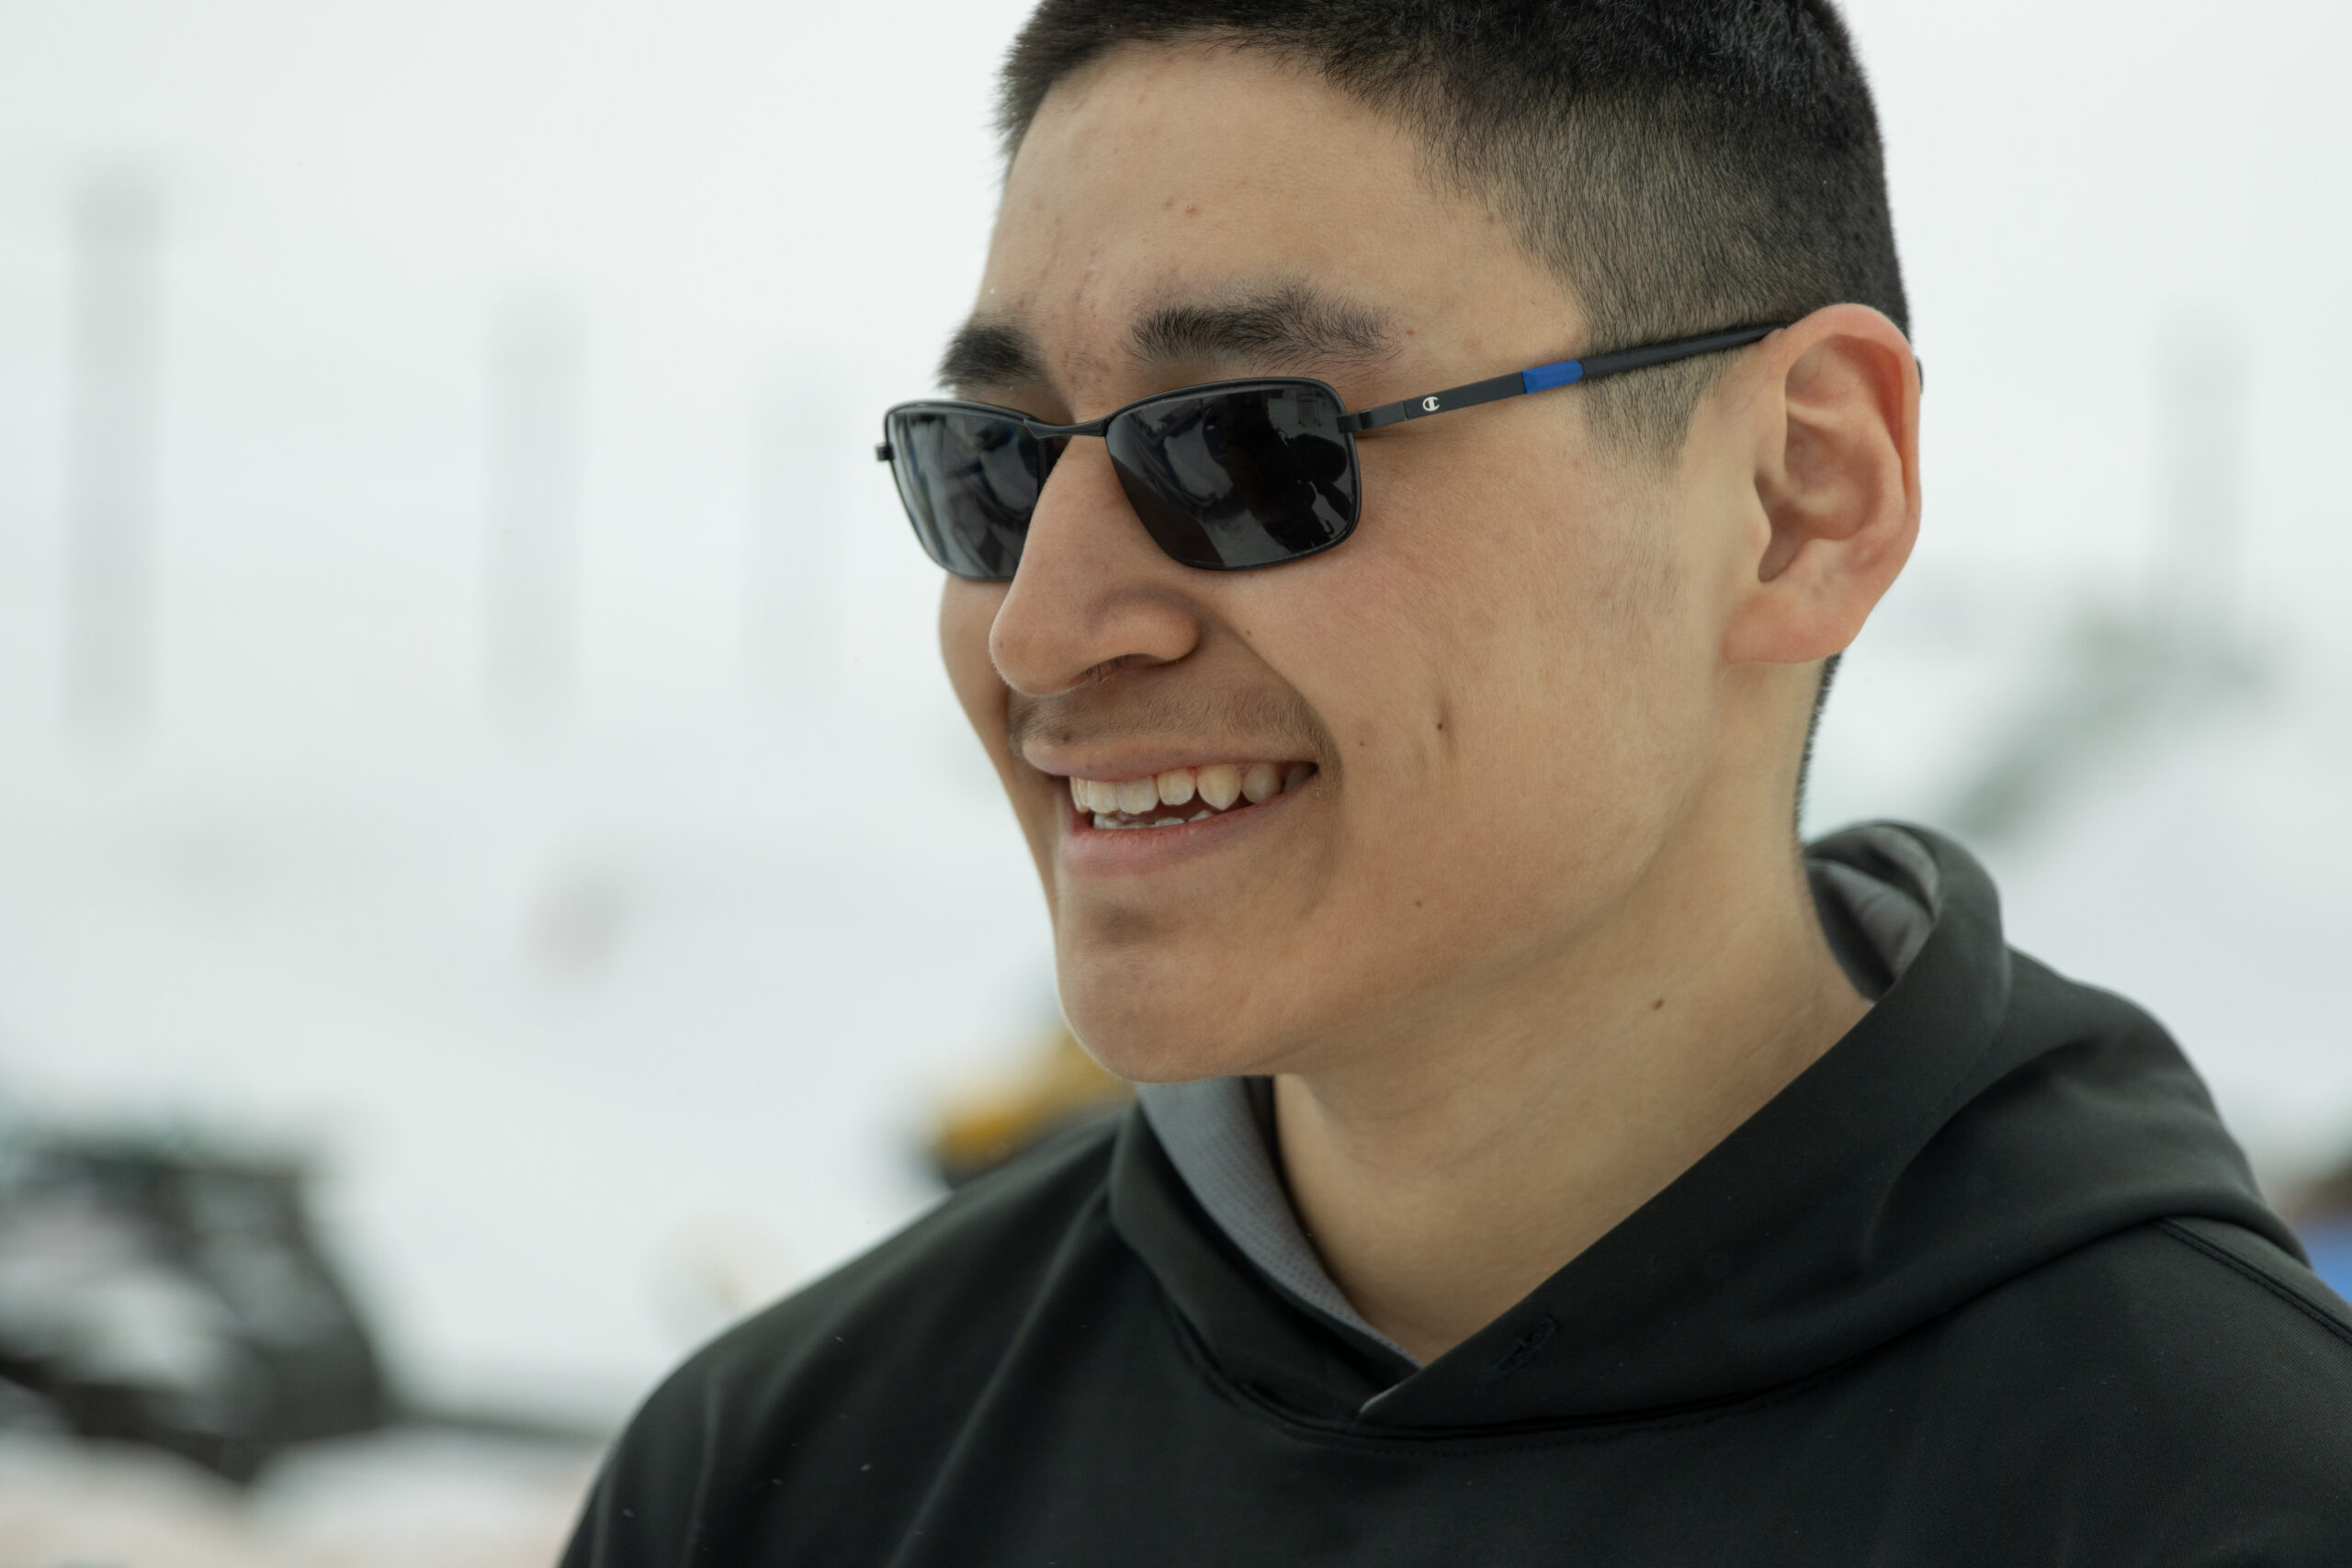 A young man in sunglasses smiles in front of a winter landscape.